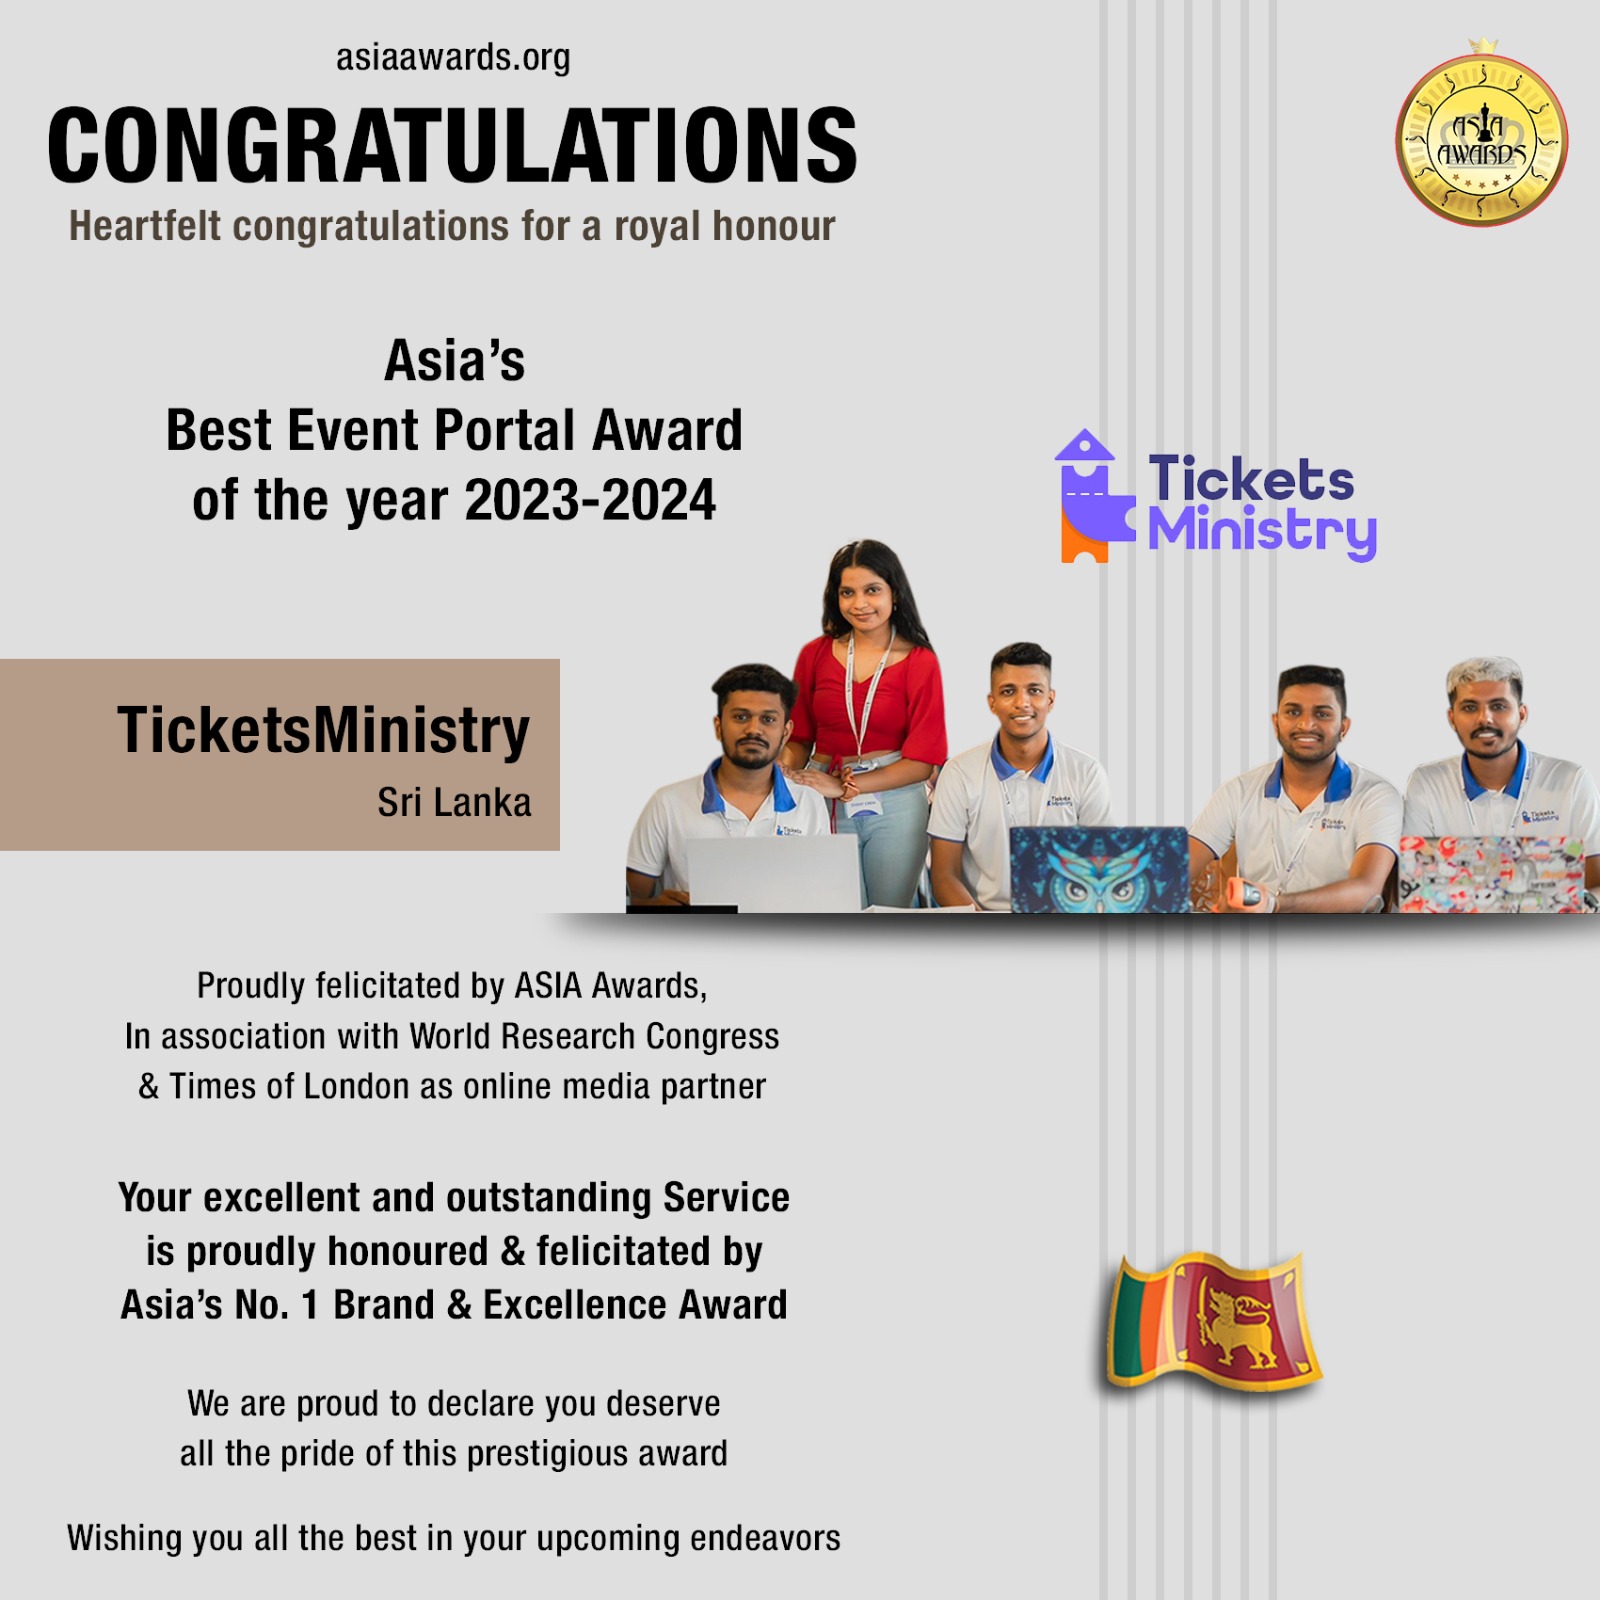 TicketsMinistry Has bagged Asia's Best Event Portal Award